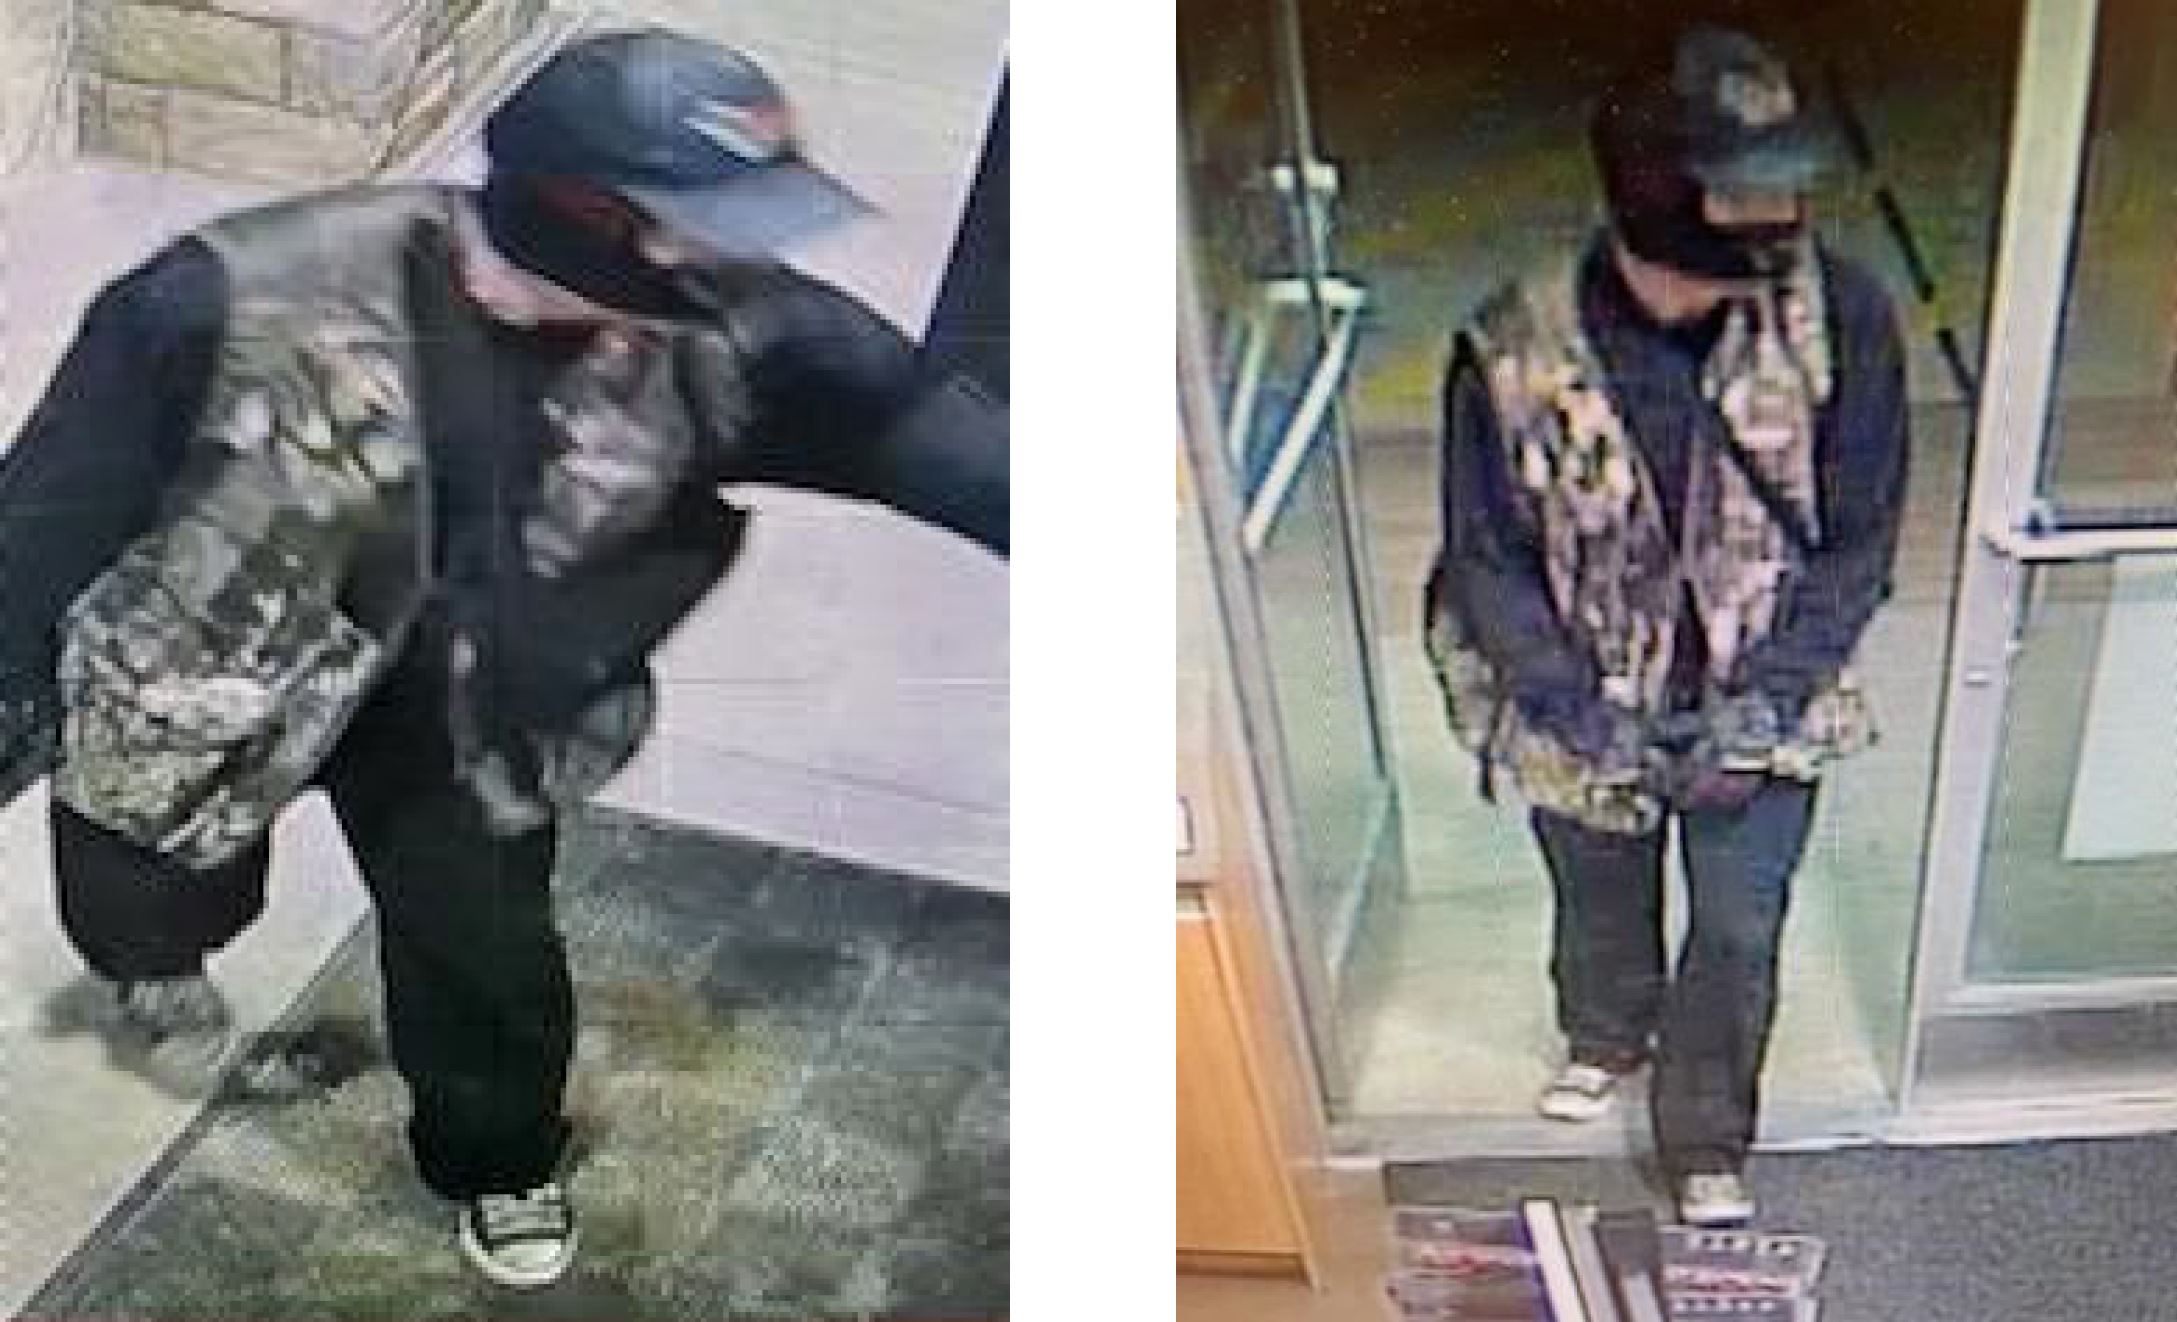 Store camera photos of robbery suspect wearing all black with oversized camouflage vest, converse sneakers with a black ski mask and ballcap.